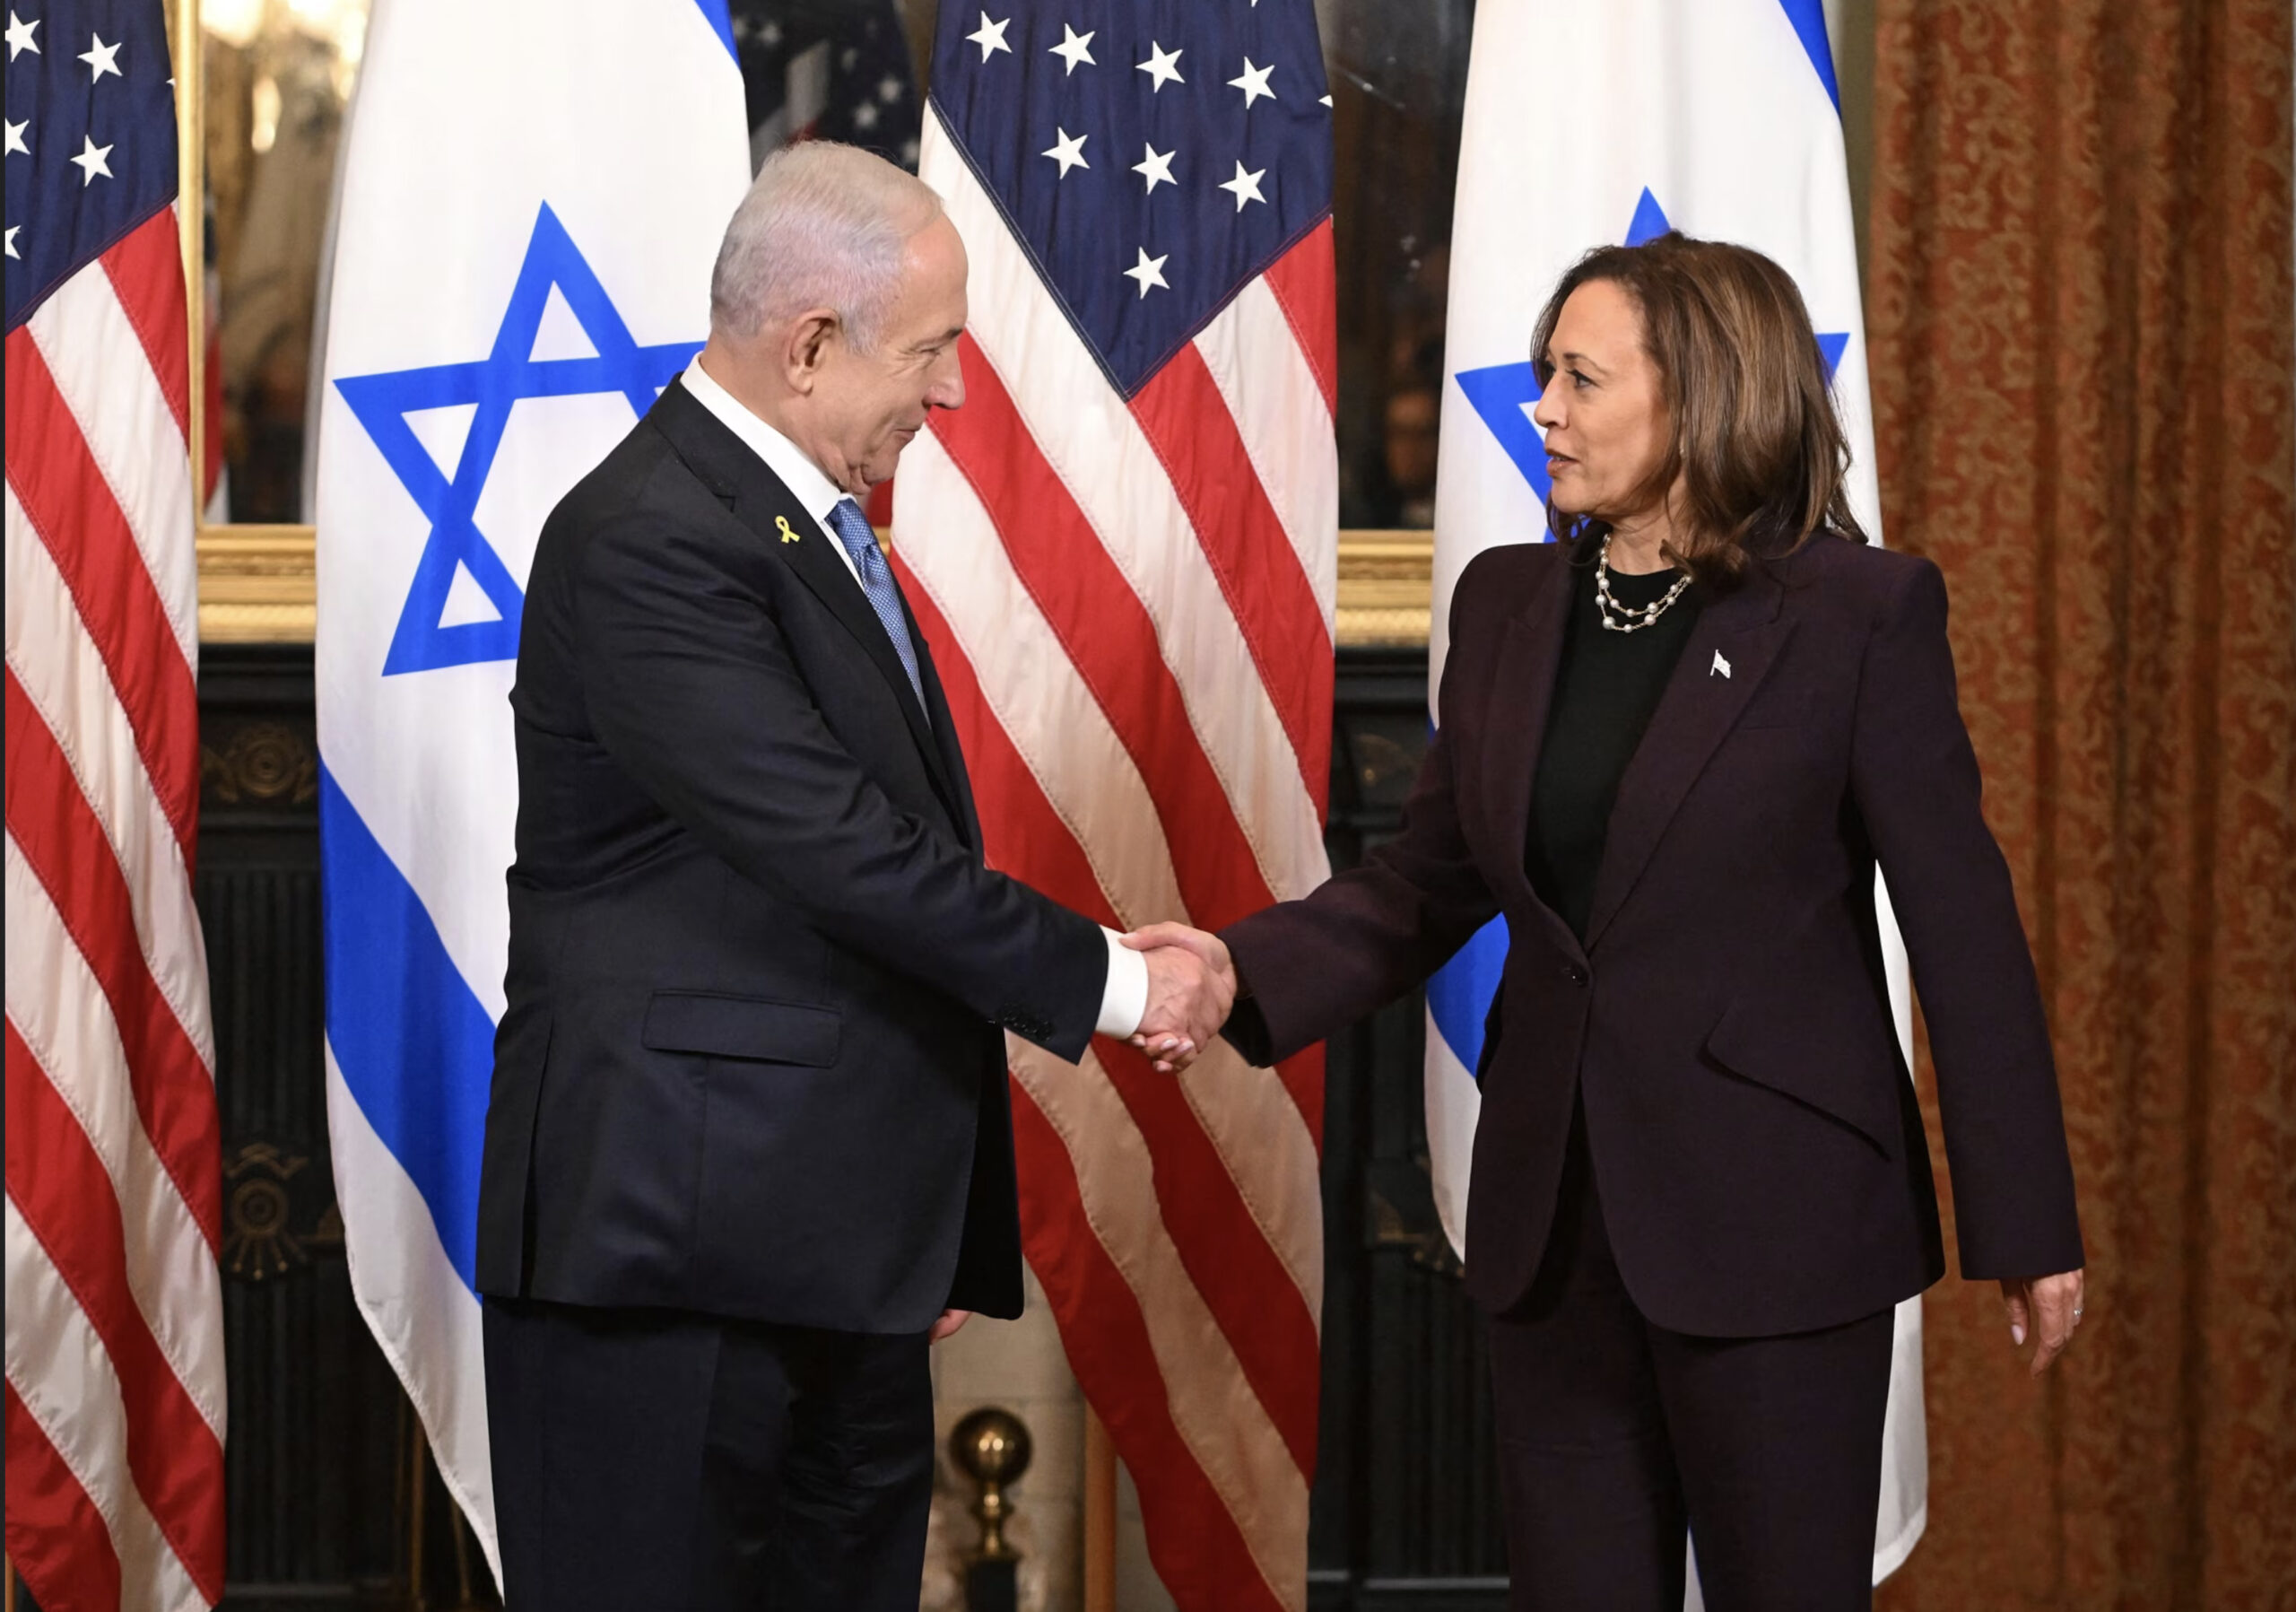 Vice President Kamala Harris meets with Israeli Prime Minister Benjamin Netanyahu at the Eisenhower Executive Office Building on the White House grounds, in Washington, D.C., U.S., July 25. – Reuters